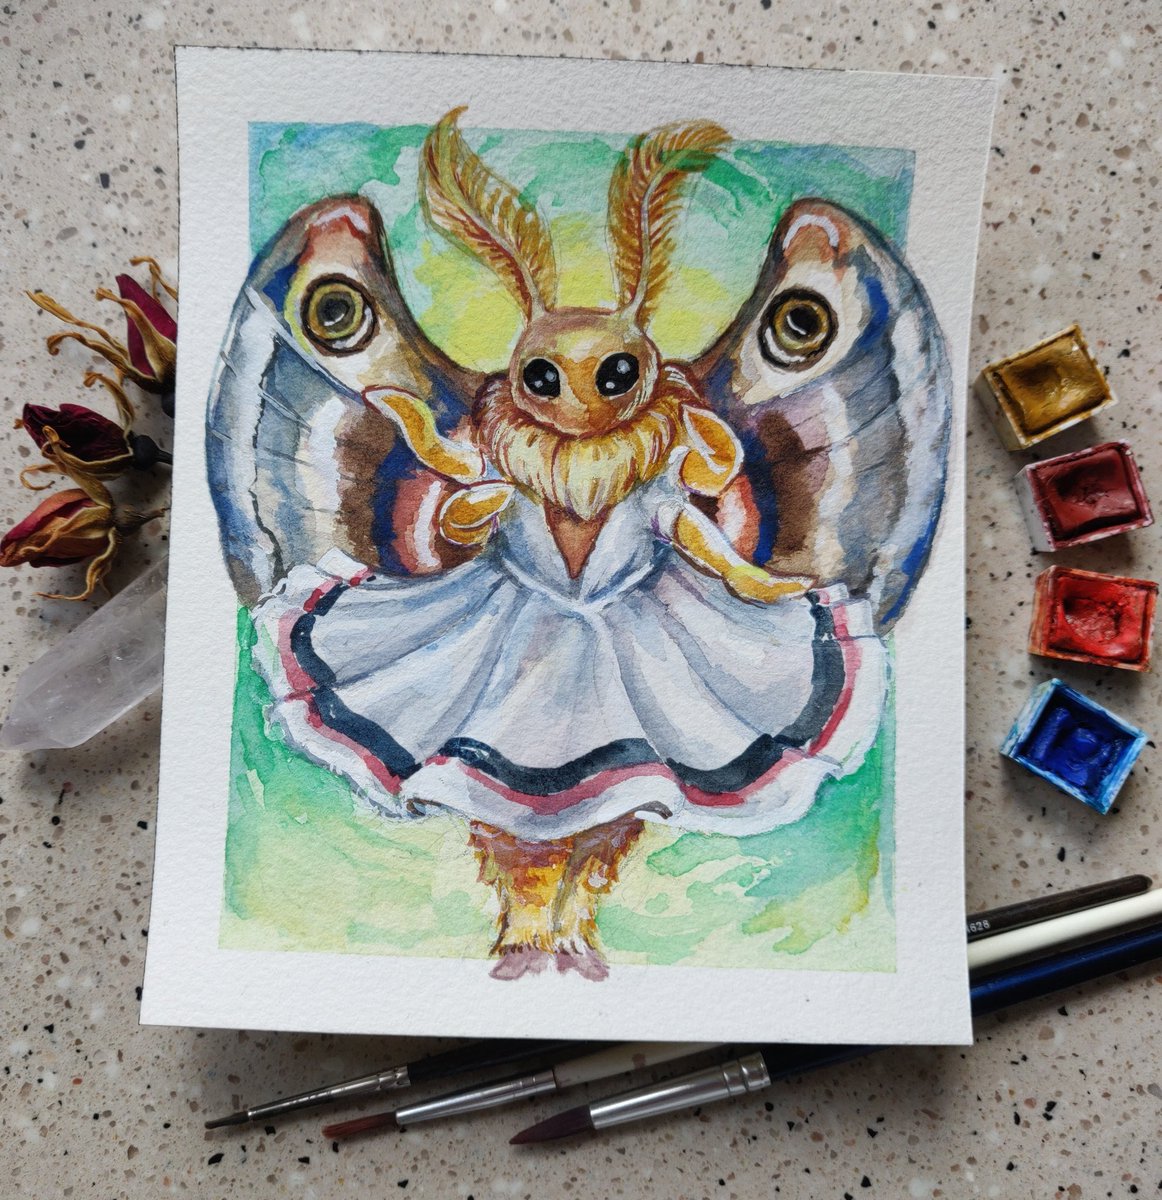 StreamINK day 21 • Insect 🦋
Prompt by @artbytrishahall

A pwetty moth pal in a pwetty dress ❤️
#streamink2022 #StreamINK